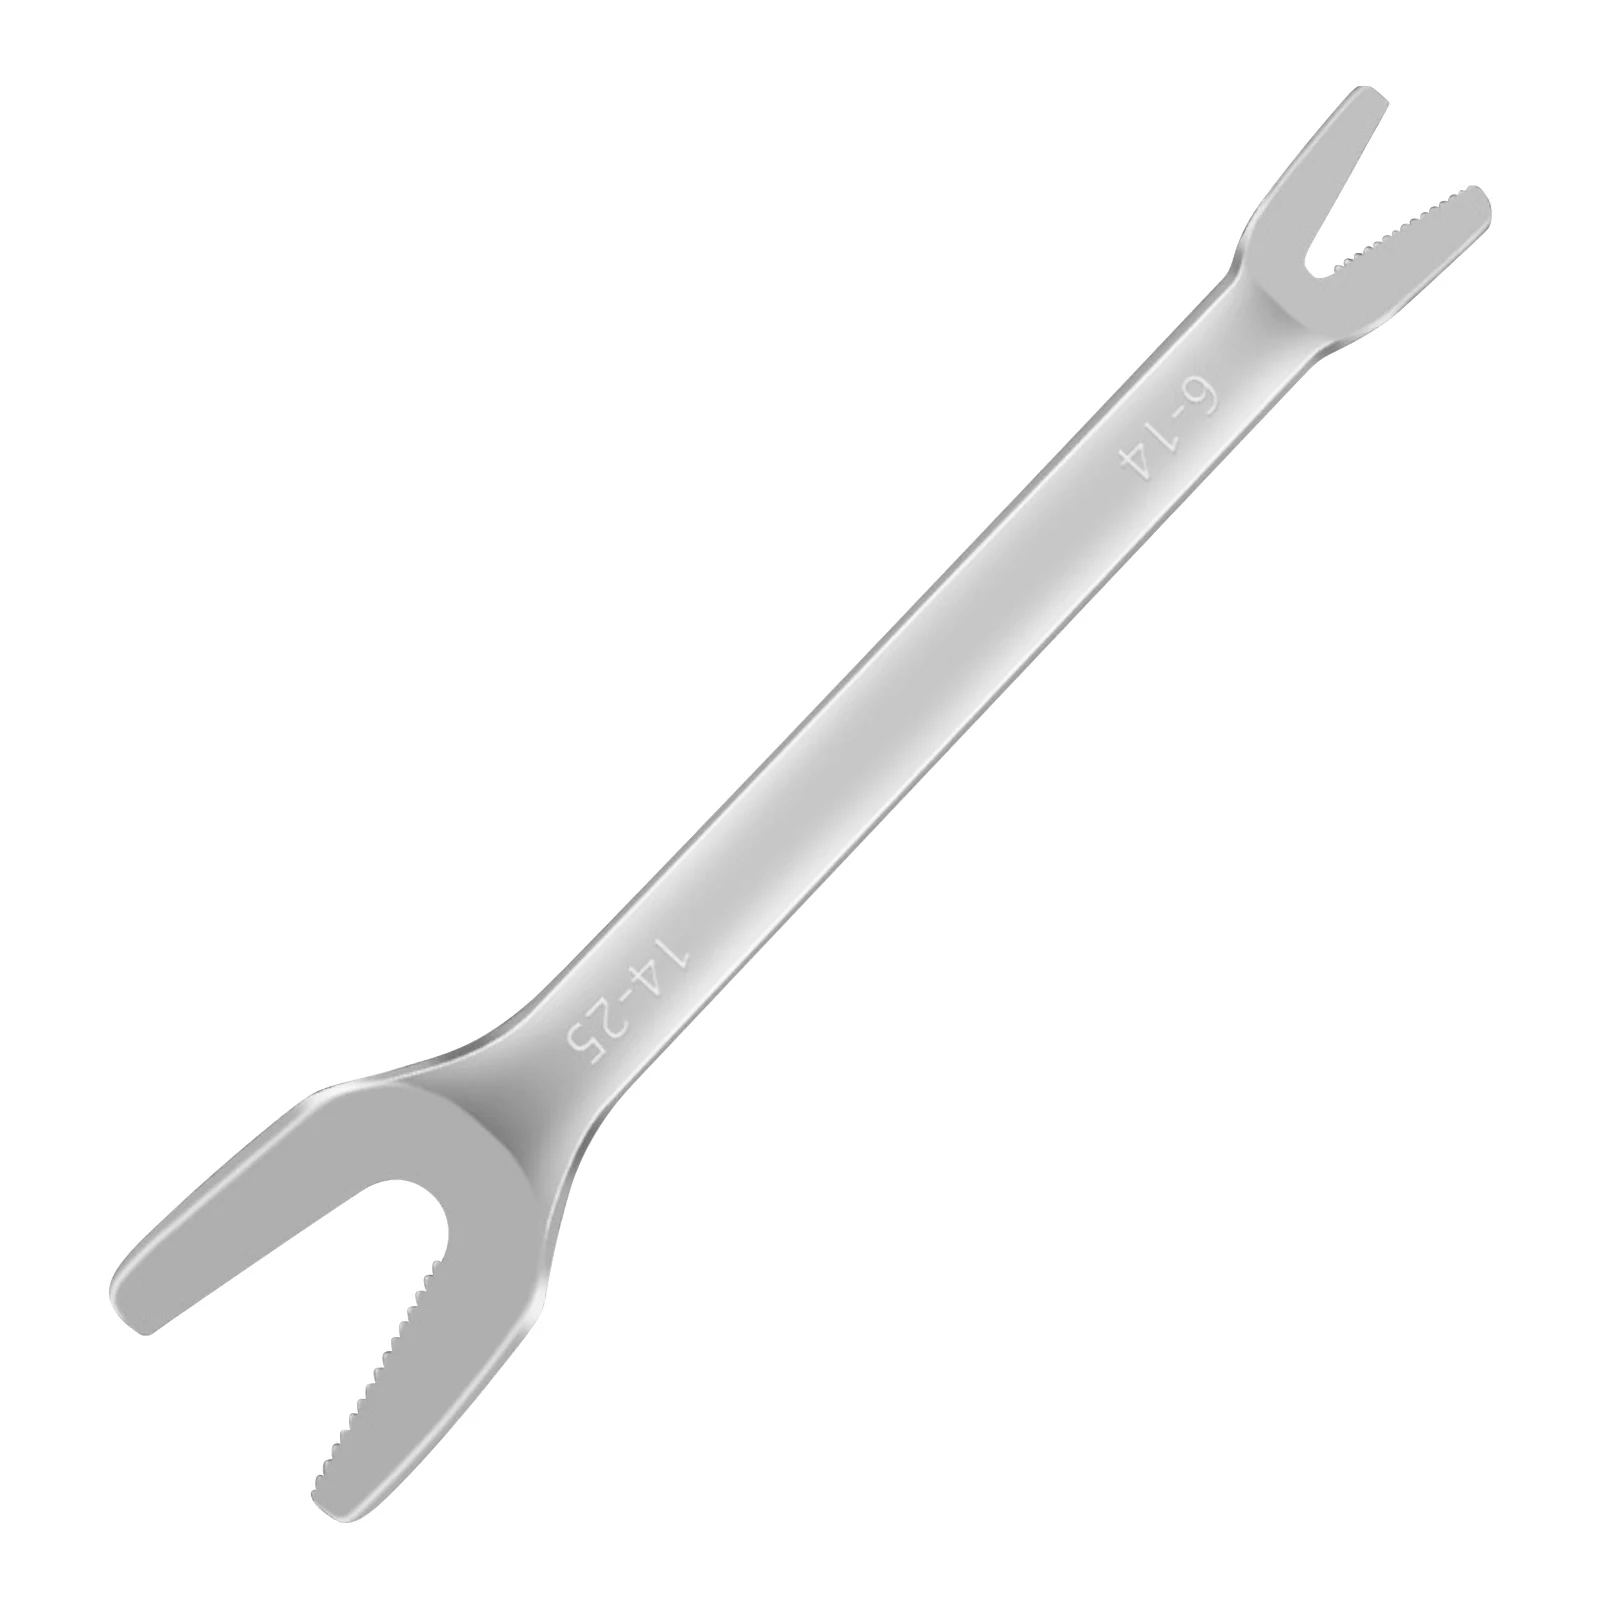 

Double-Ended Wrench Open-End Wrench Spanner Open Jaw Wrench Serrated Wrench 7/32-1 with Jagged Opening 6-25mm Size